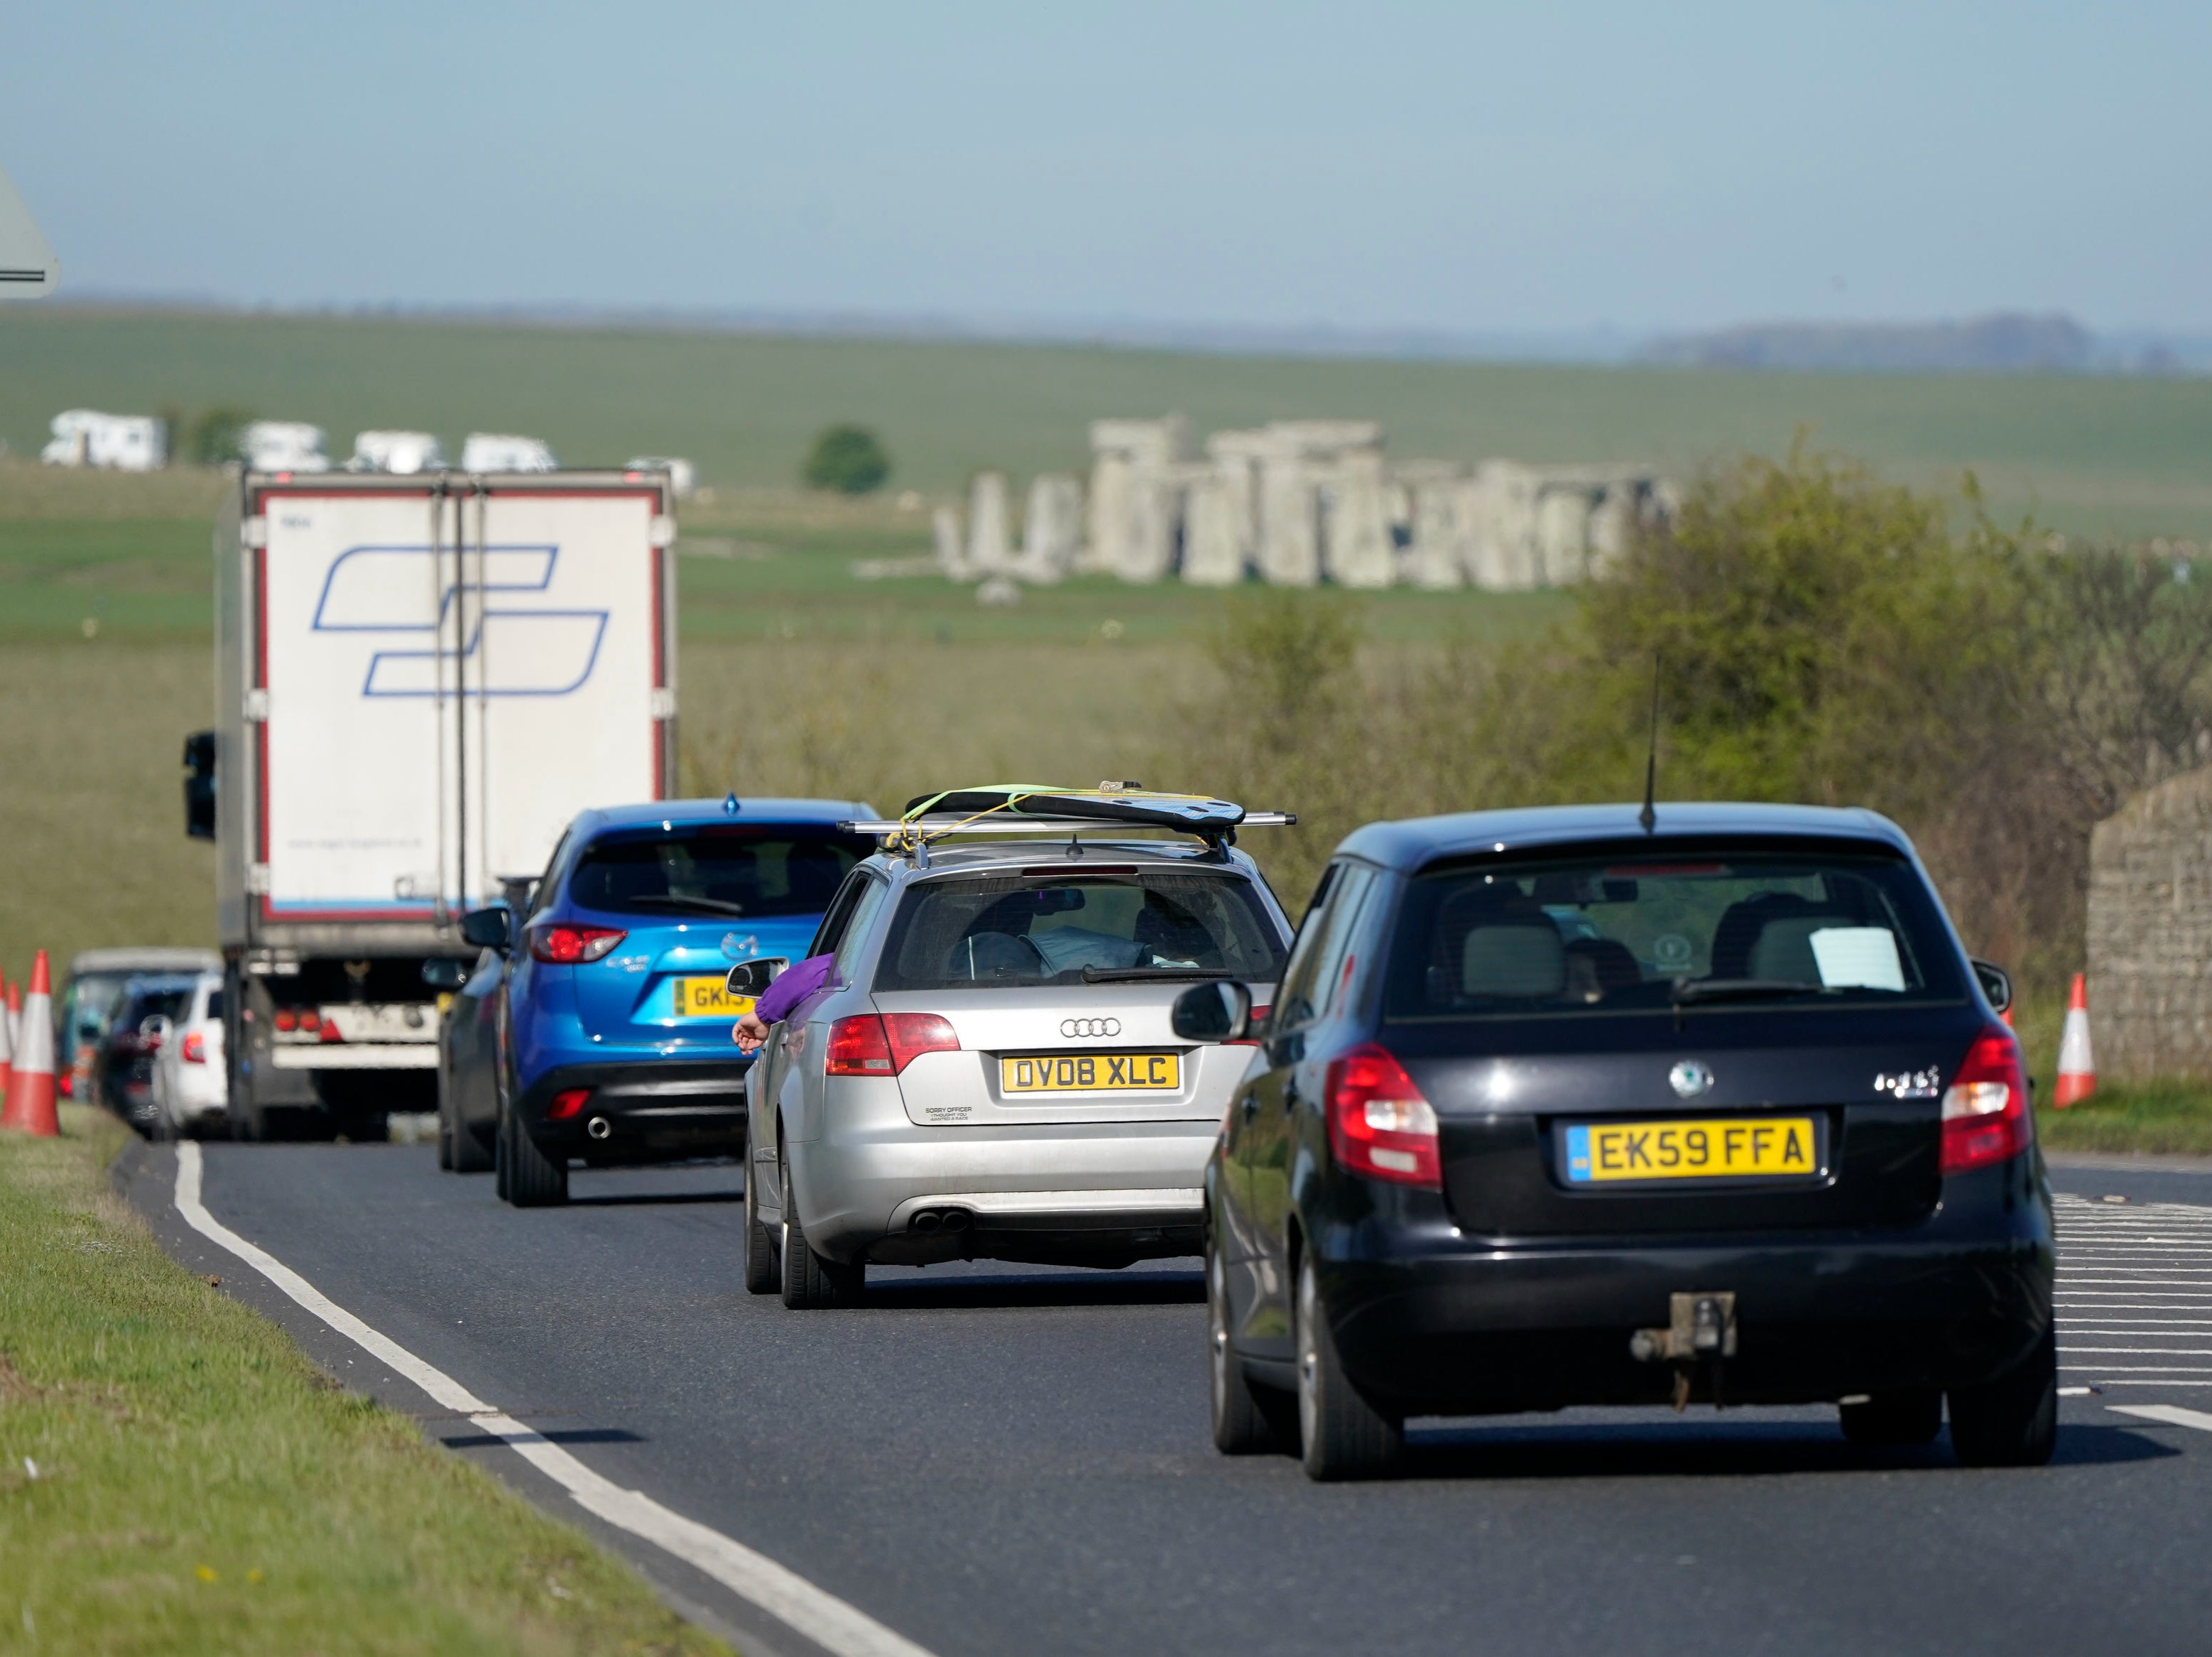 Cars make their way along the A303 past Stonehenge in Wiltshire during the Easter getaway